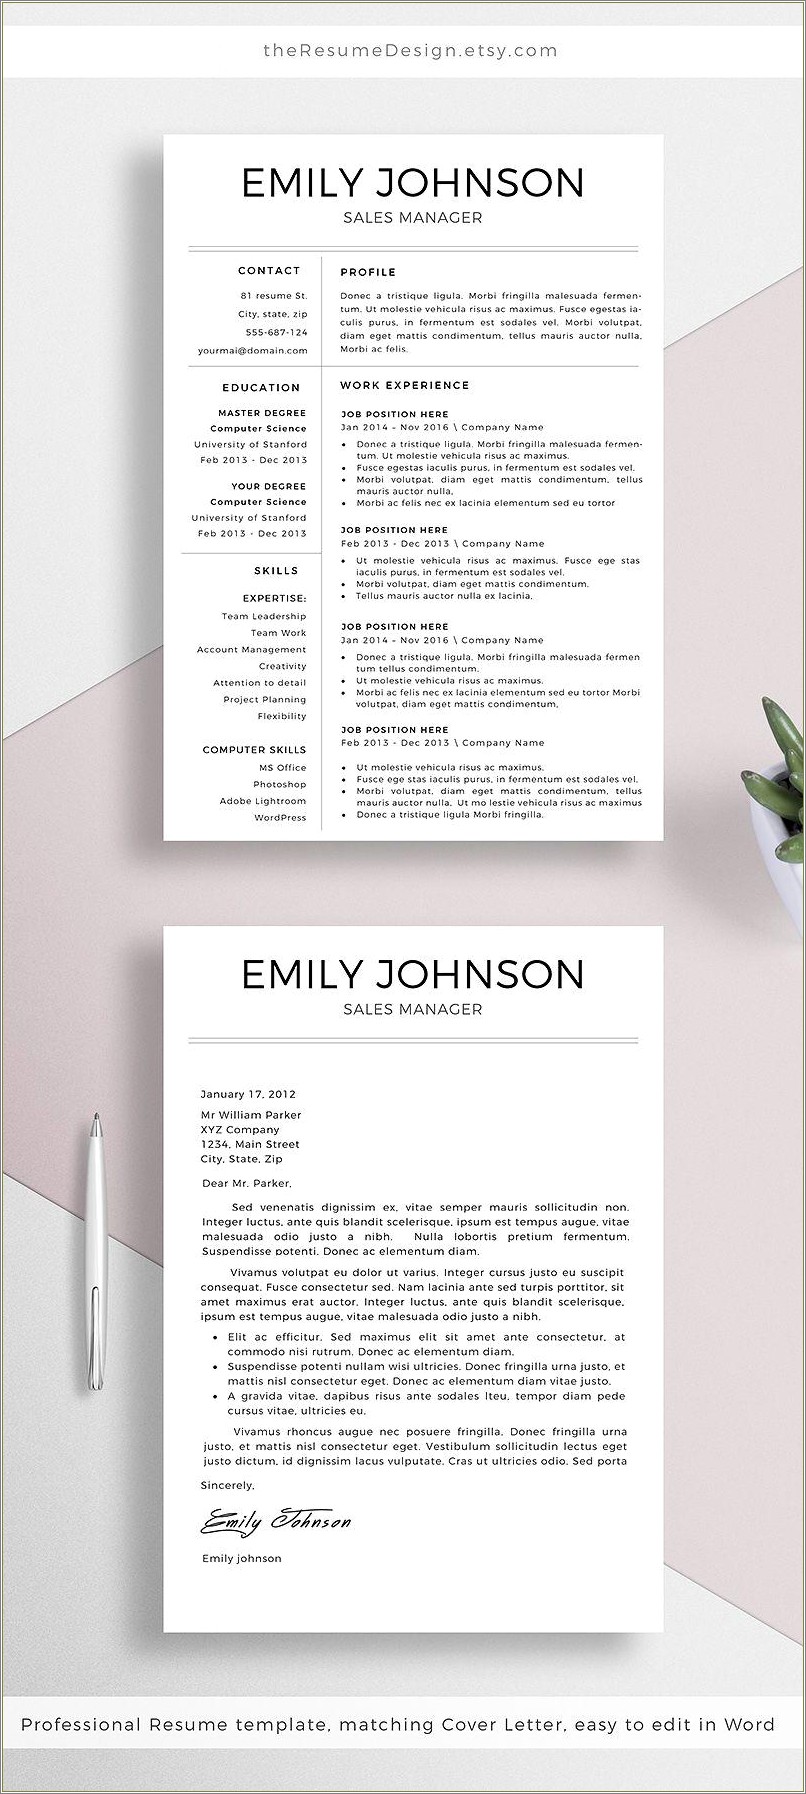 Resume Templetes That Stand Out For Proffessional Jobs